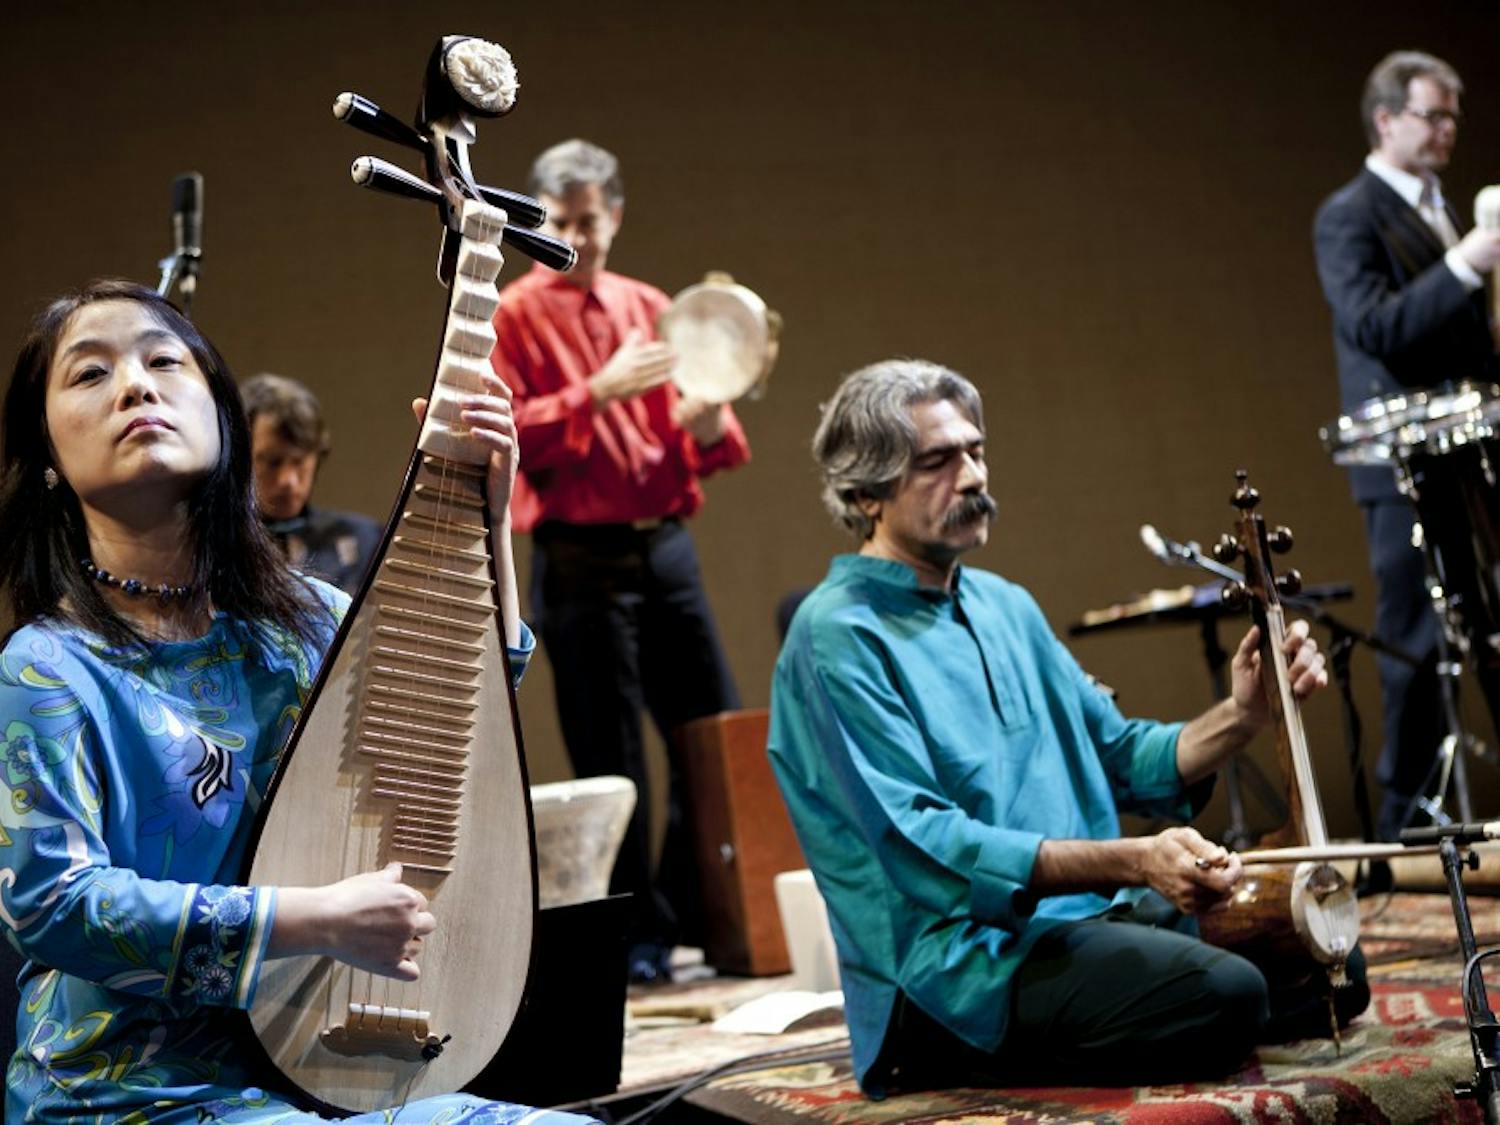 The Silk Road Ensemble performs at the Mondavi Center at the University of California, Davis on April 8, 2011. (Photo by Max Whittaker)